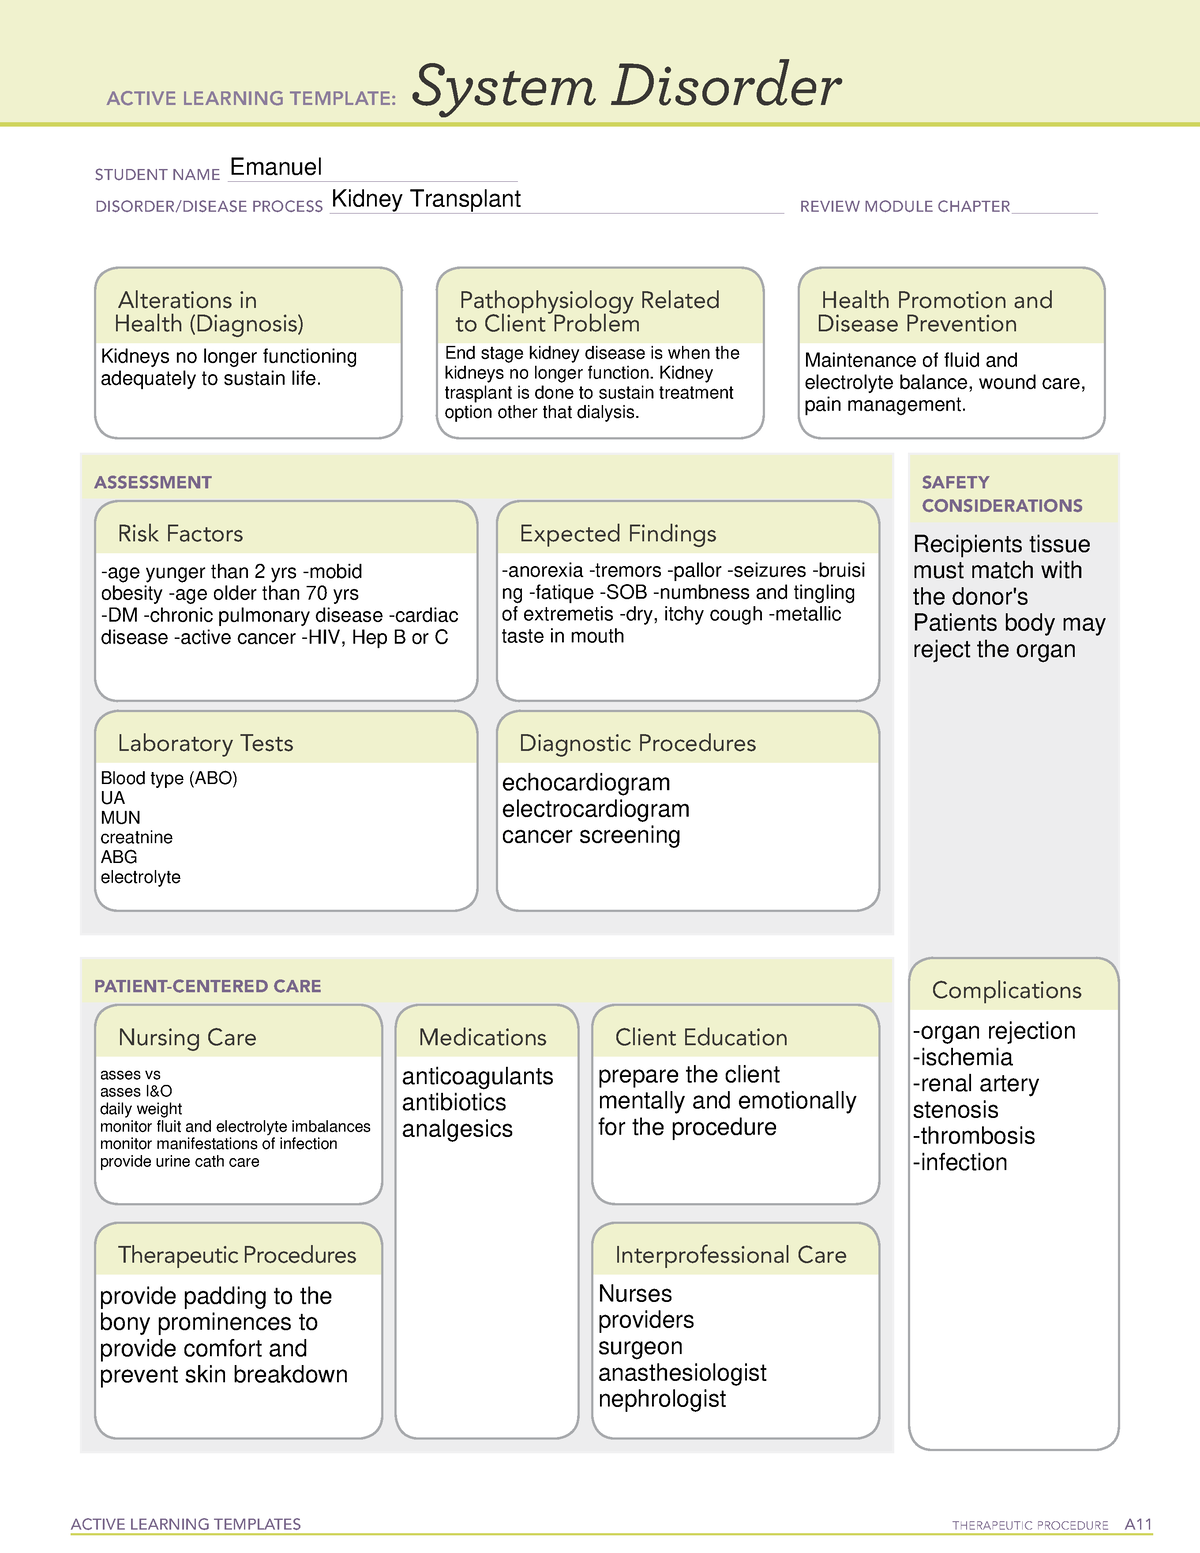 Kidney Transplant - .... - ACTIVE LEARNING TEMPLATES THERAPEUTIC ...